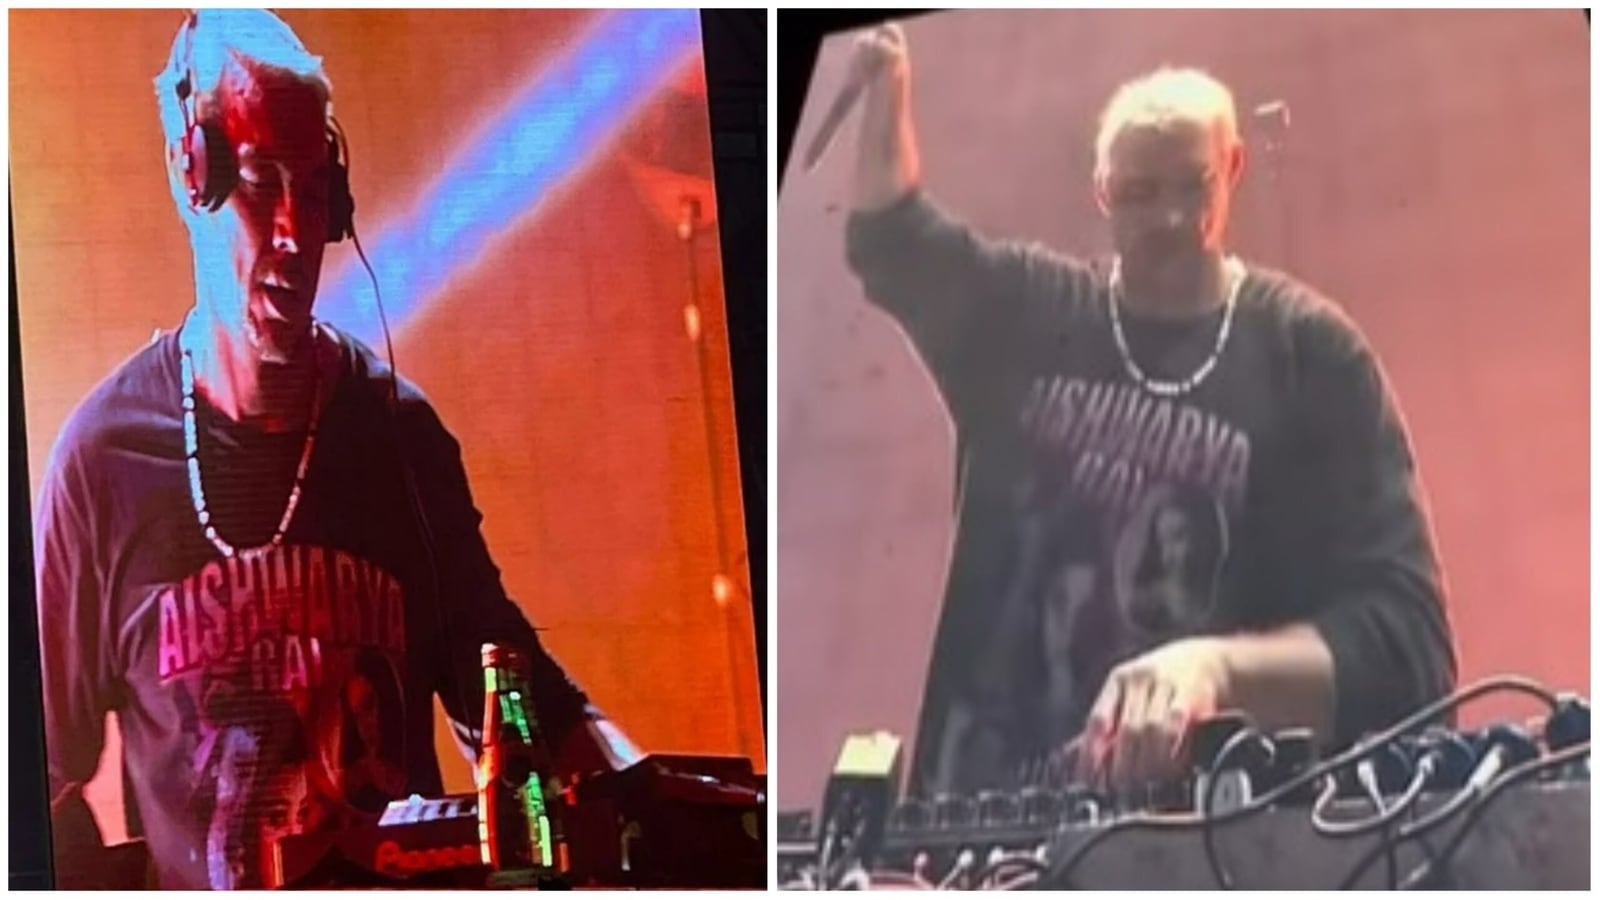 DJ Diplo wears ‘Aishwarya Rai’ t-shirt at Lollapalooza in Mumbai, fans say 'westerners trying to appeal Indian masses'